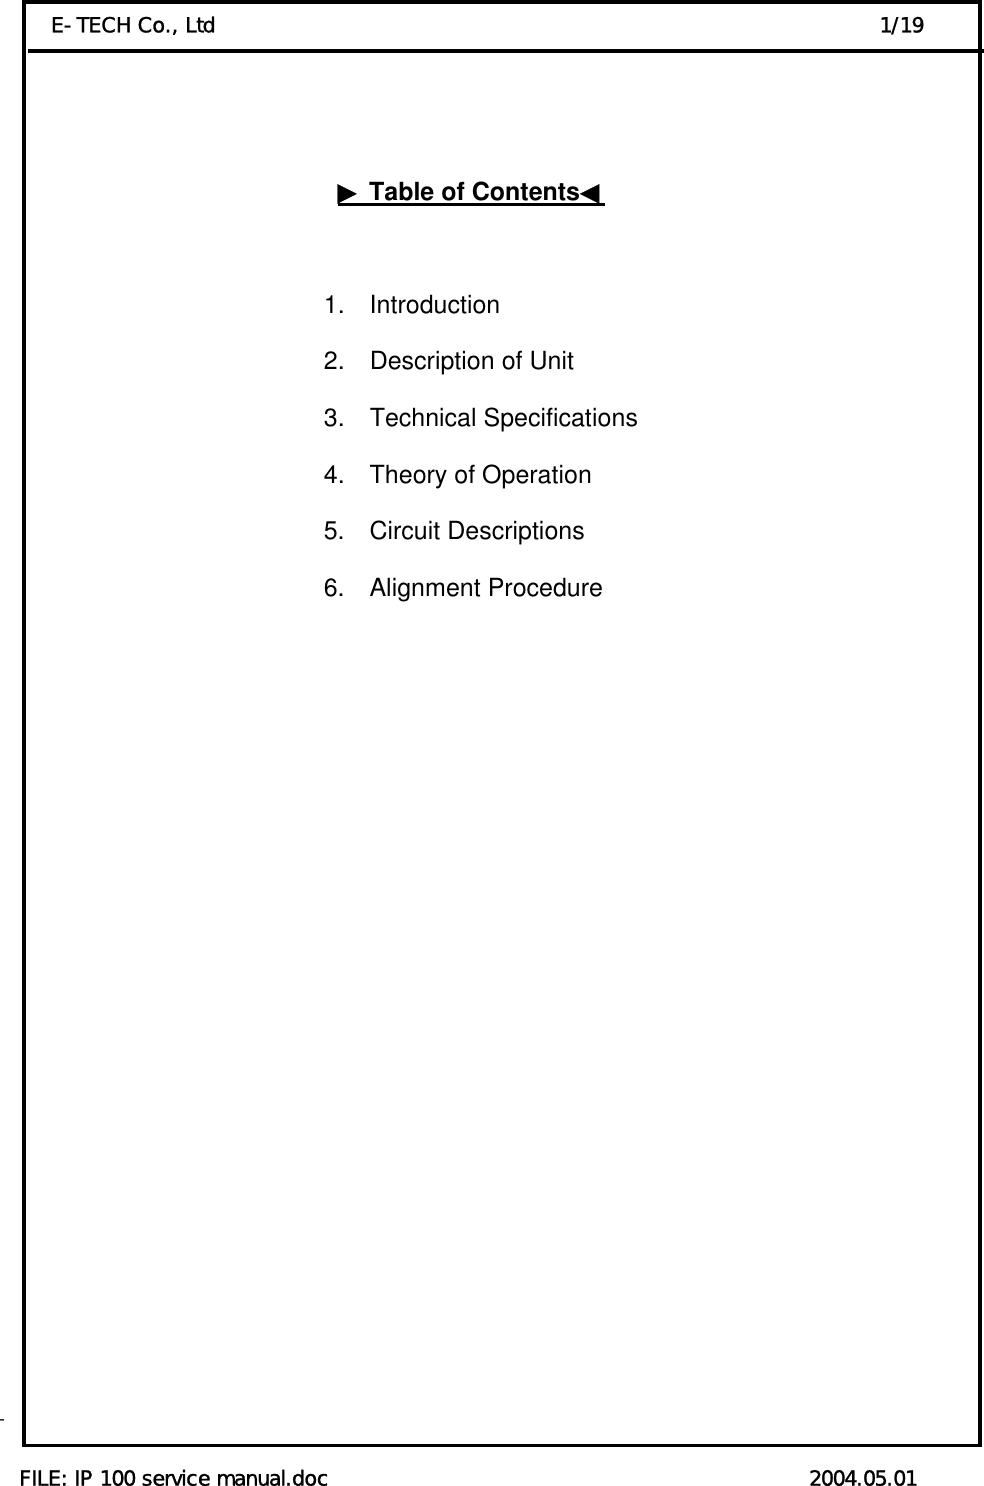  FILE: IP 100 service manual.doc                                               2004.05.01 E-TECH Co., Ltd                                                                 1/19    ▶Table of Contents◀                            1.  Introduction                                          2.  Description of Unit                                          3.  Technical Specifications                                           4.  Theory of Operation 5.  Circuit Descriptions    6.  Alignment Procedure                                                                                                                                                                                                                                              - 